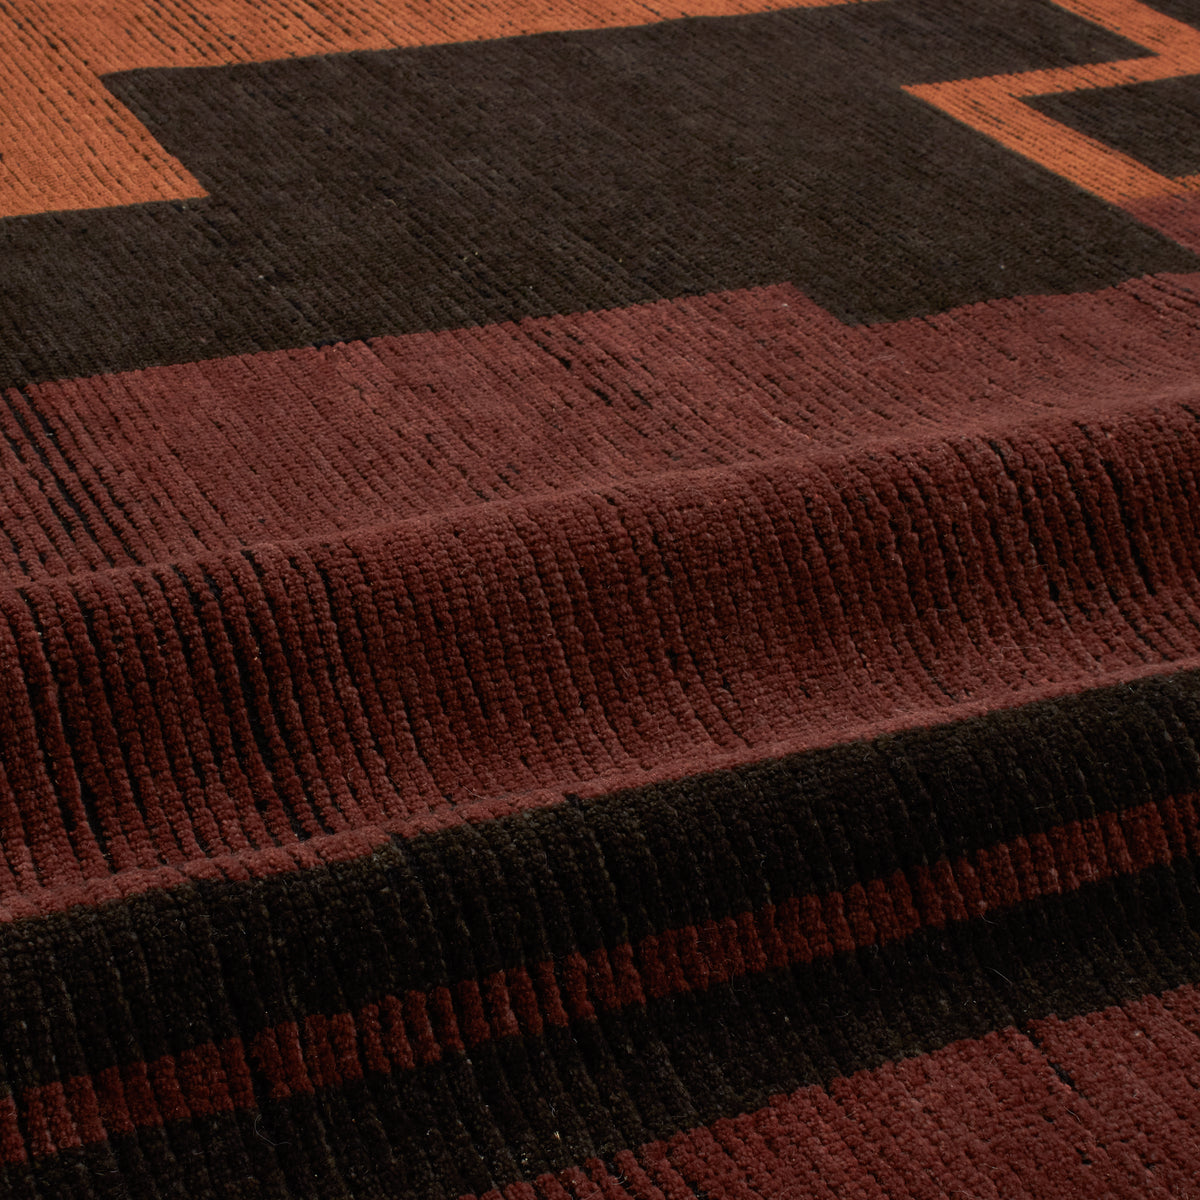 At Mkt, we believe rug design is a fine balance of modernity and tradition.